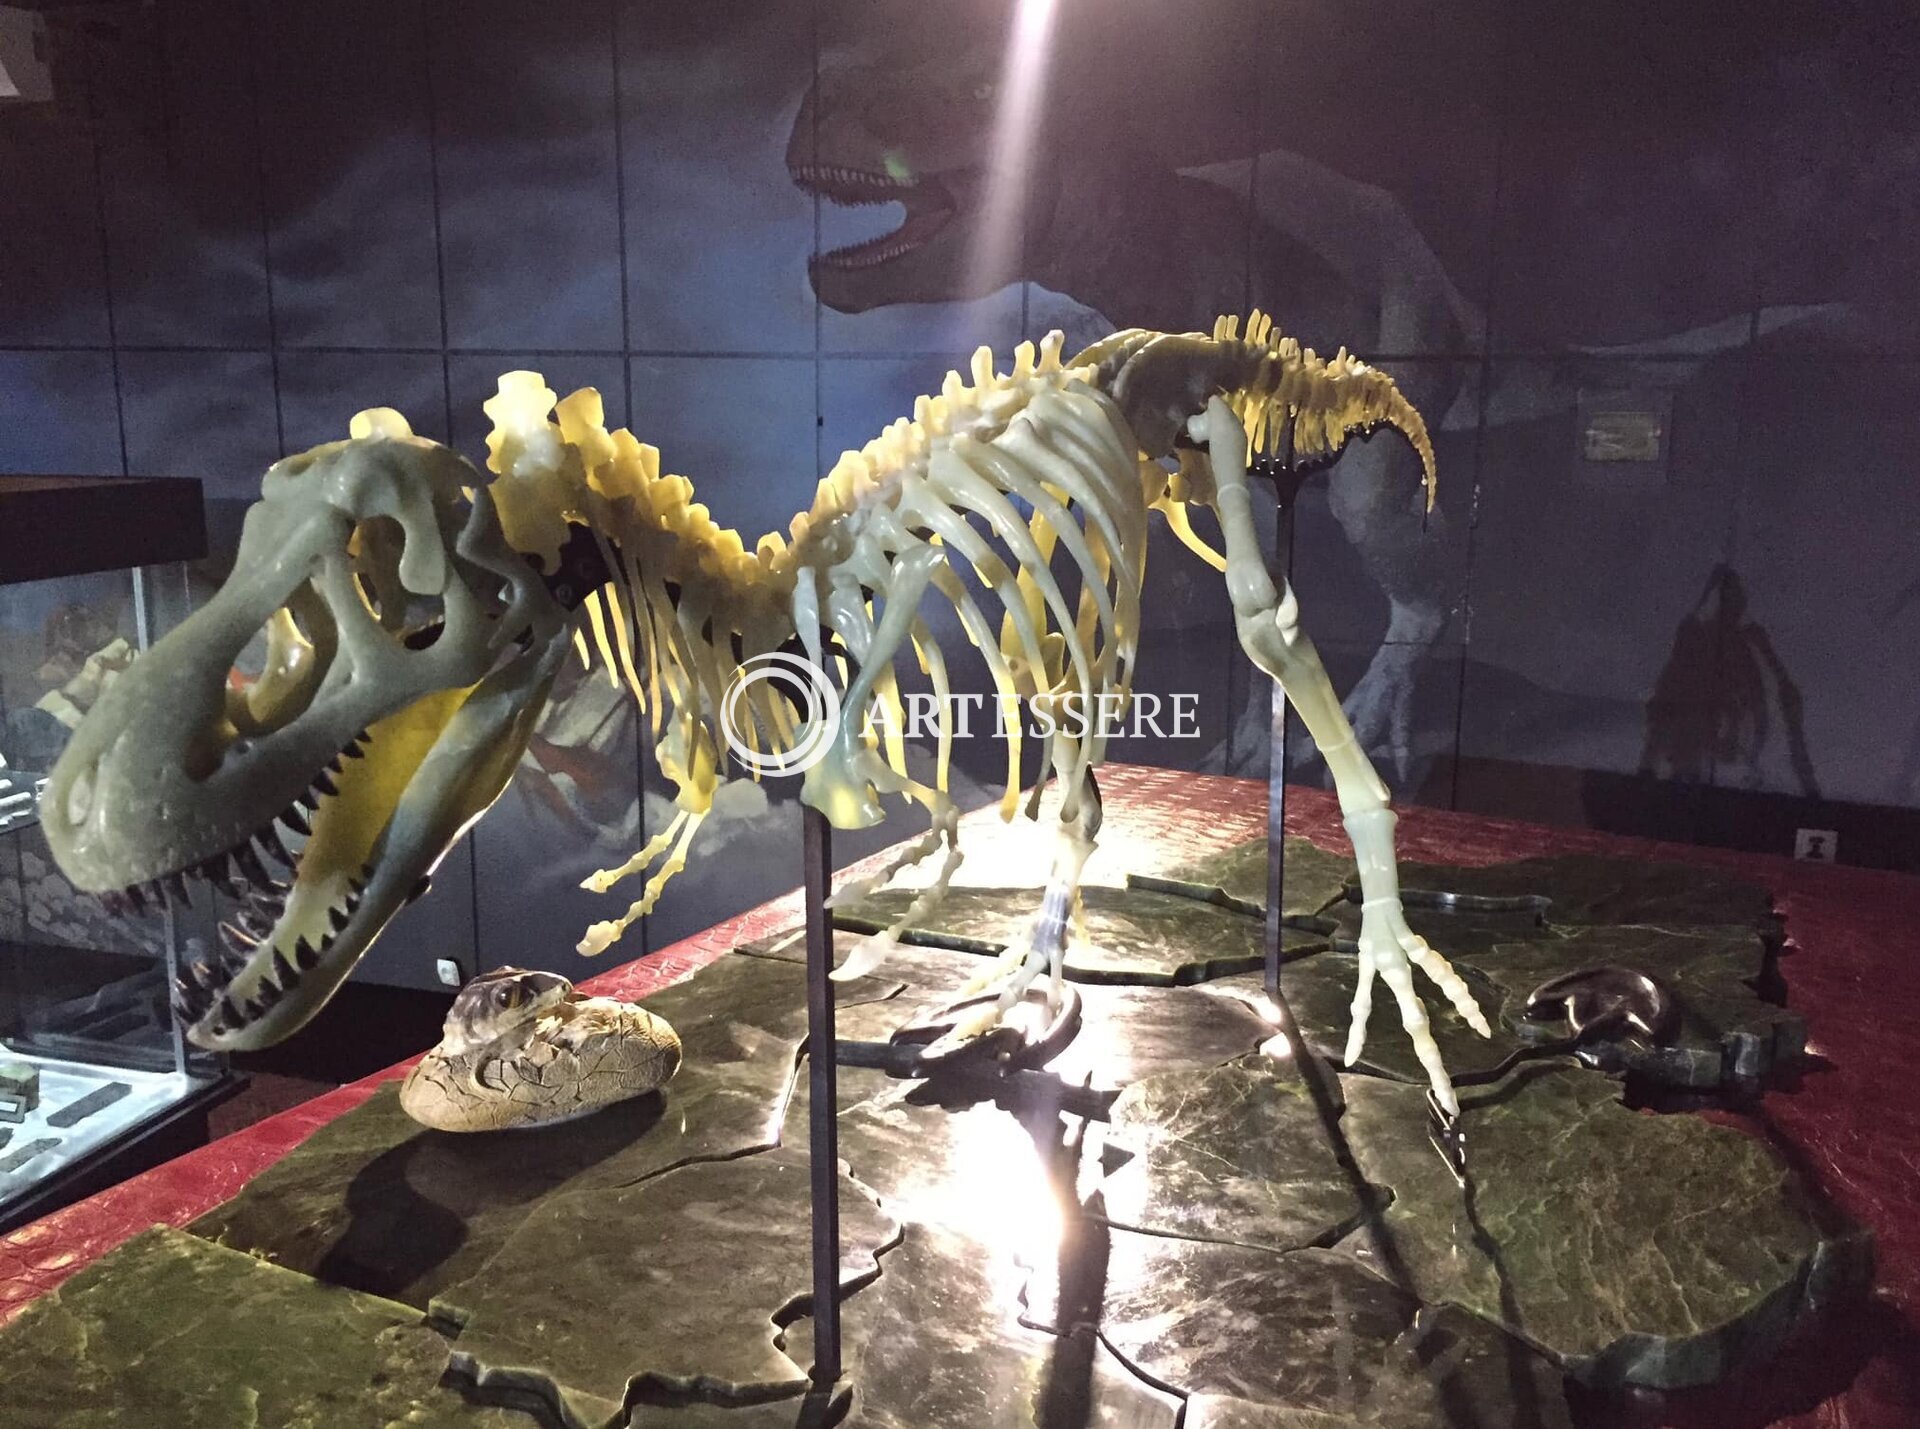 The Central Museum of Mongolian Dinosaurs